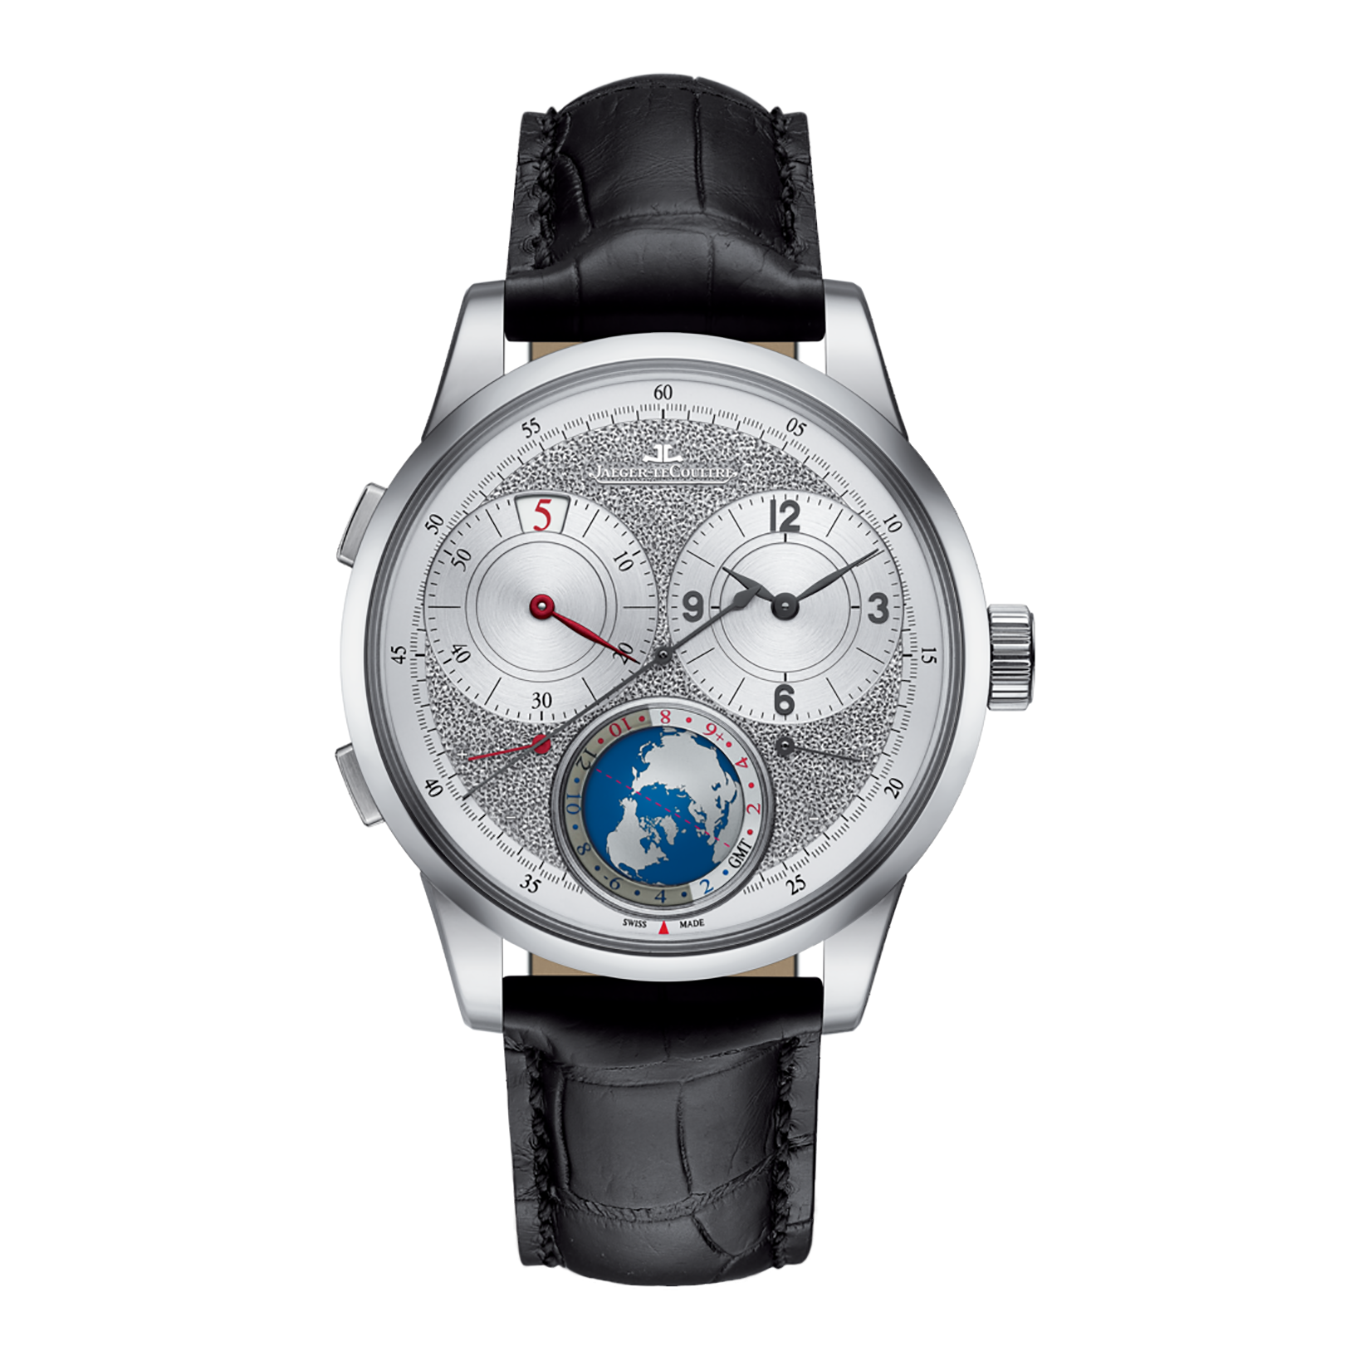 Duom�tre Unique Travel Time on in White Gold on Black Alligator Leather Strap with Silver Dial